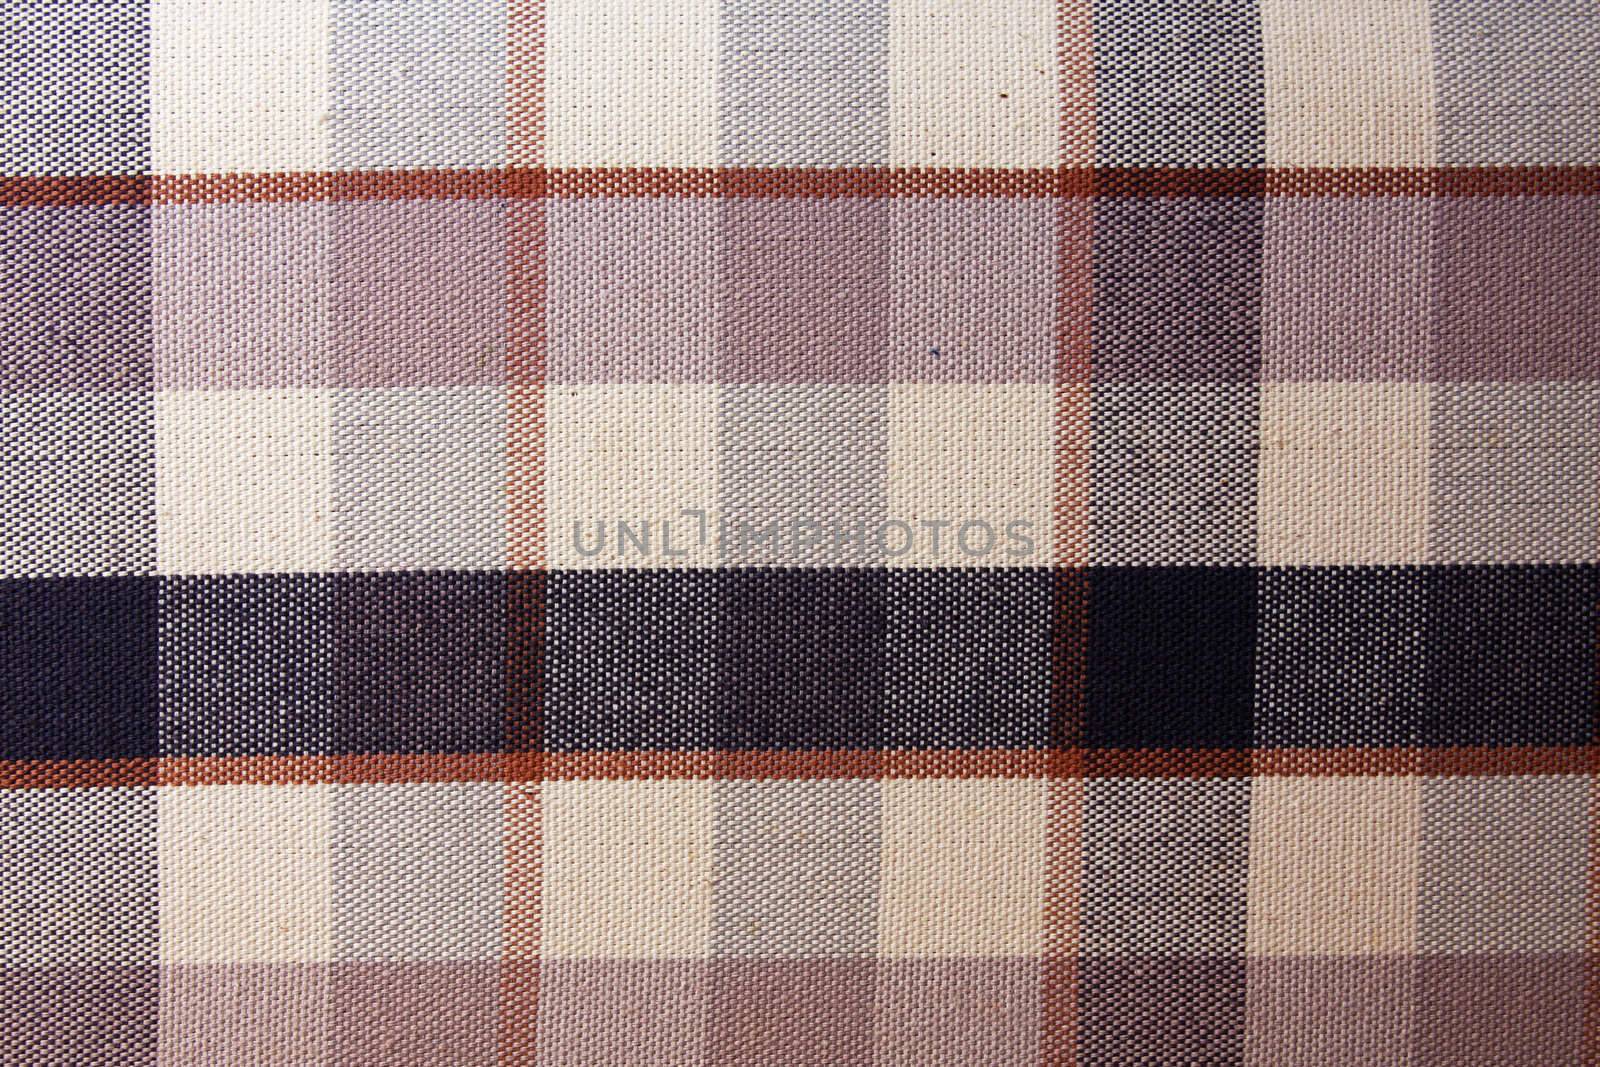 chequered pattern - background by LuBueno